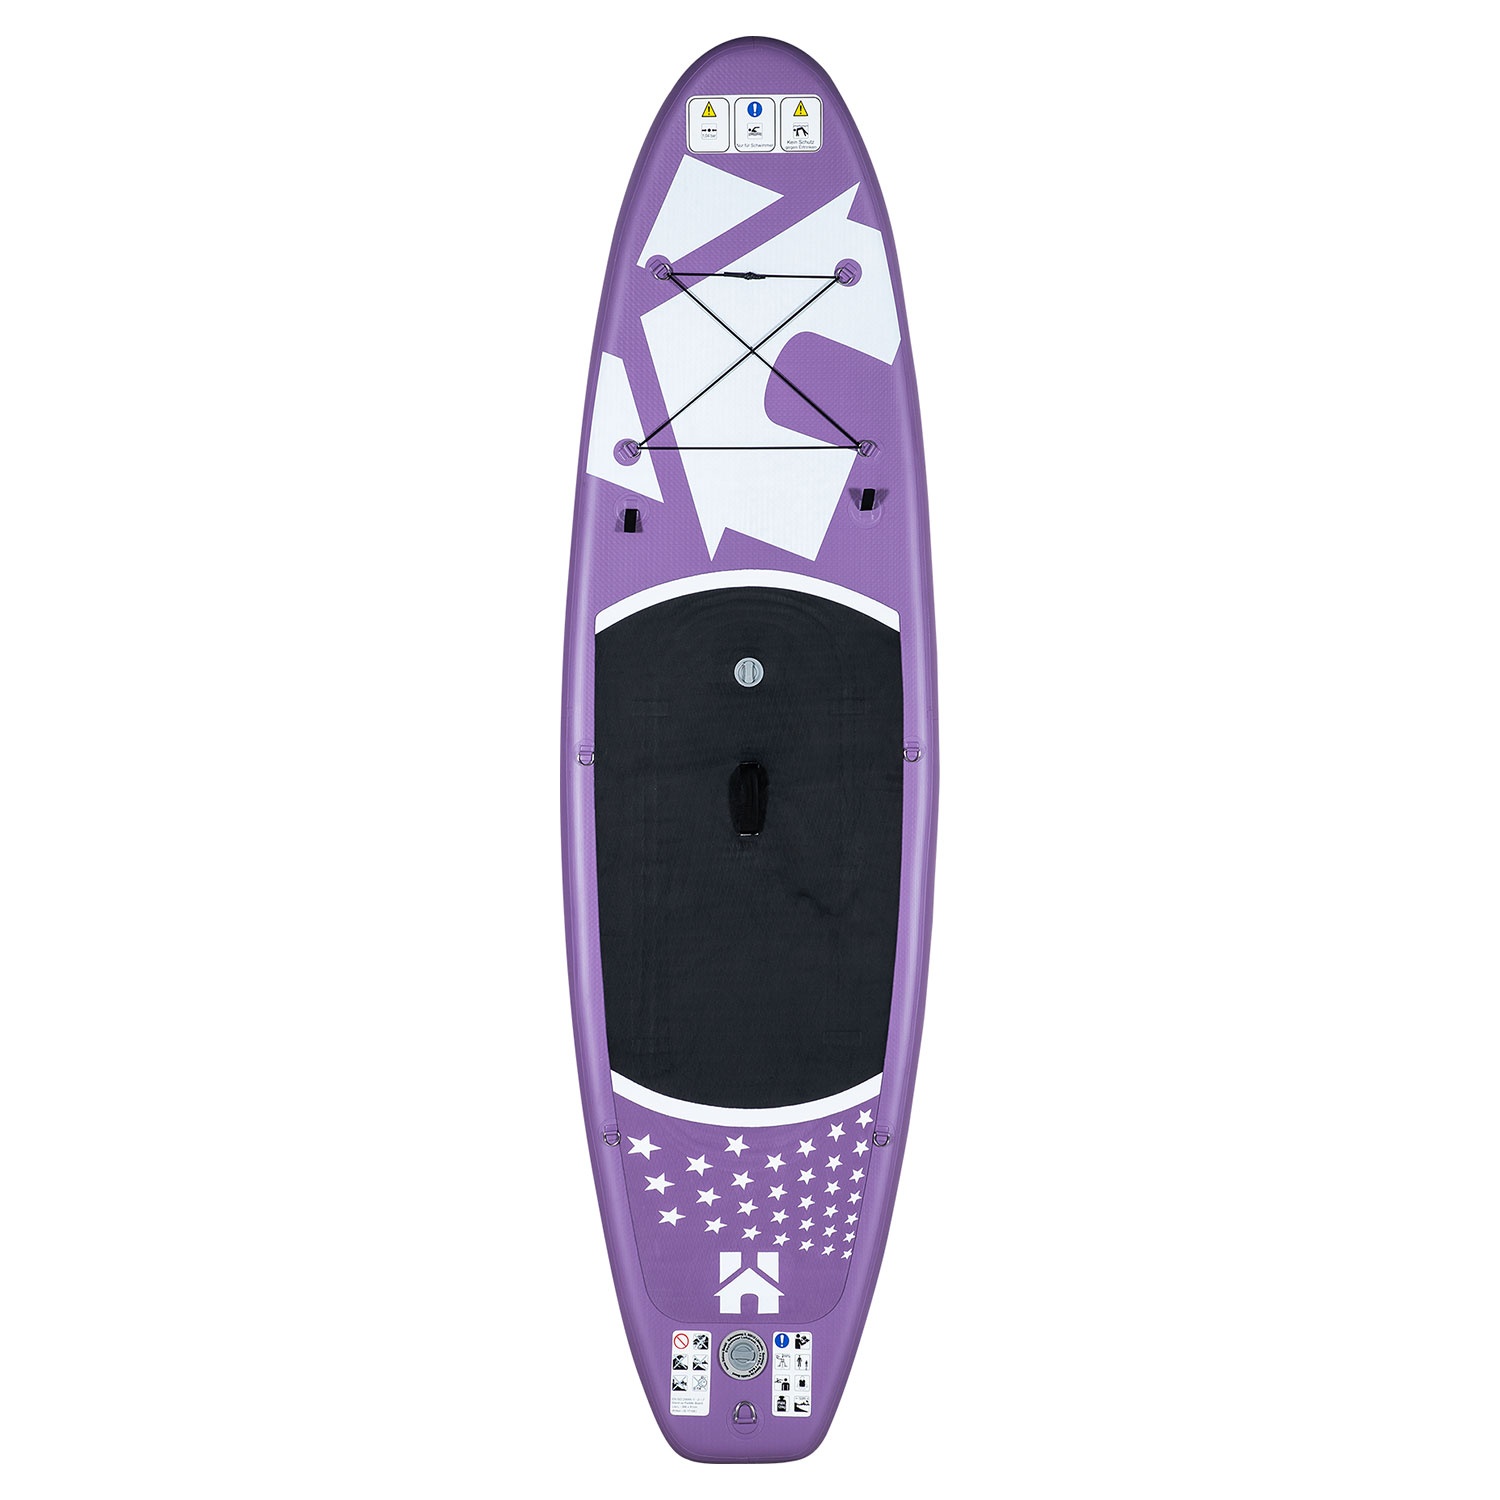 HOME DELUXE Stand-up-Paddle- Board Moana, 320 cm – Lila